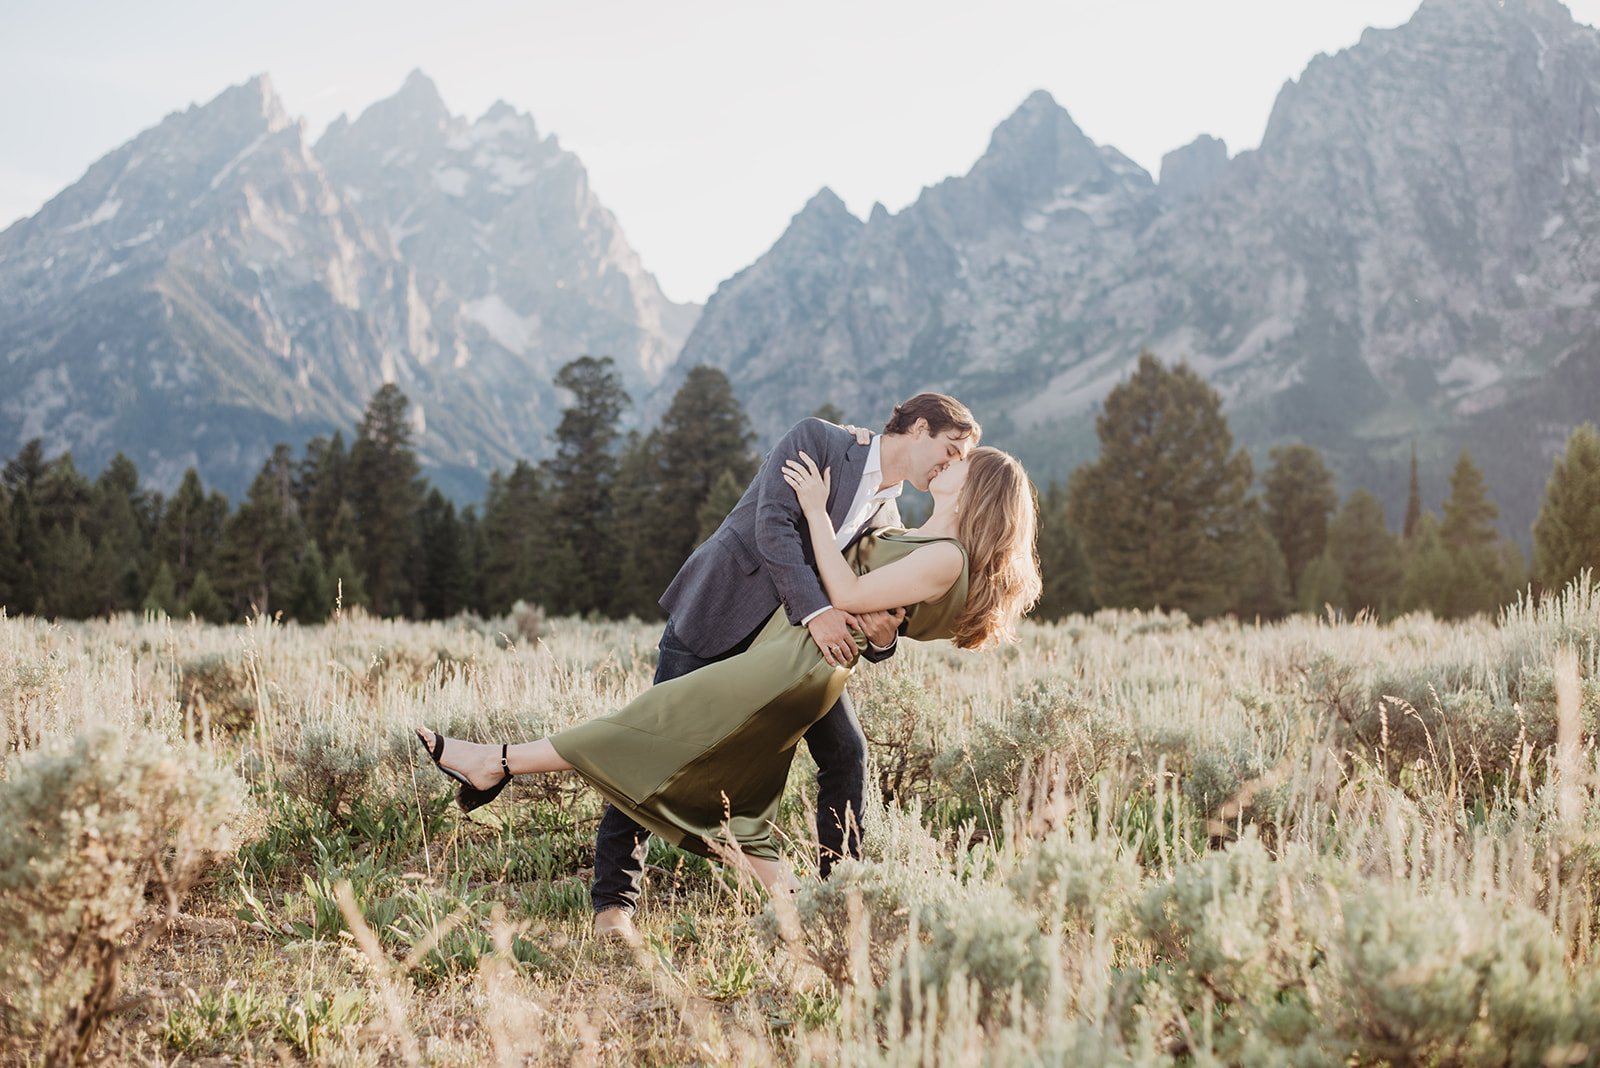 man dipping woman in an olive green dress as they dance together in a meadow in the Grand Tetons